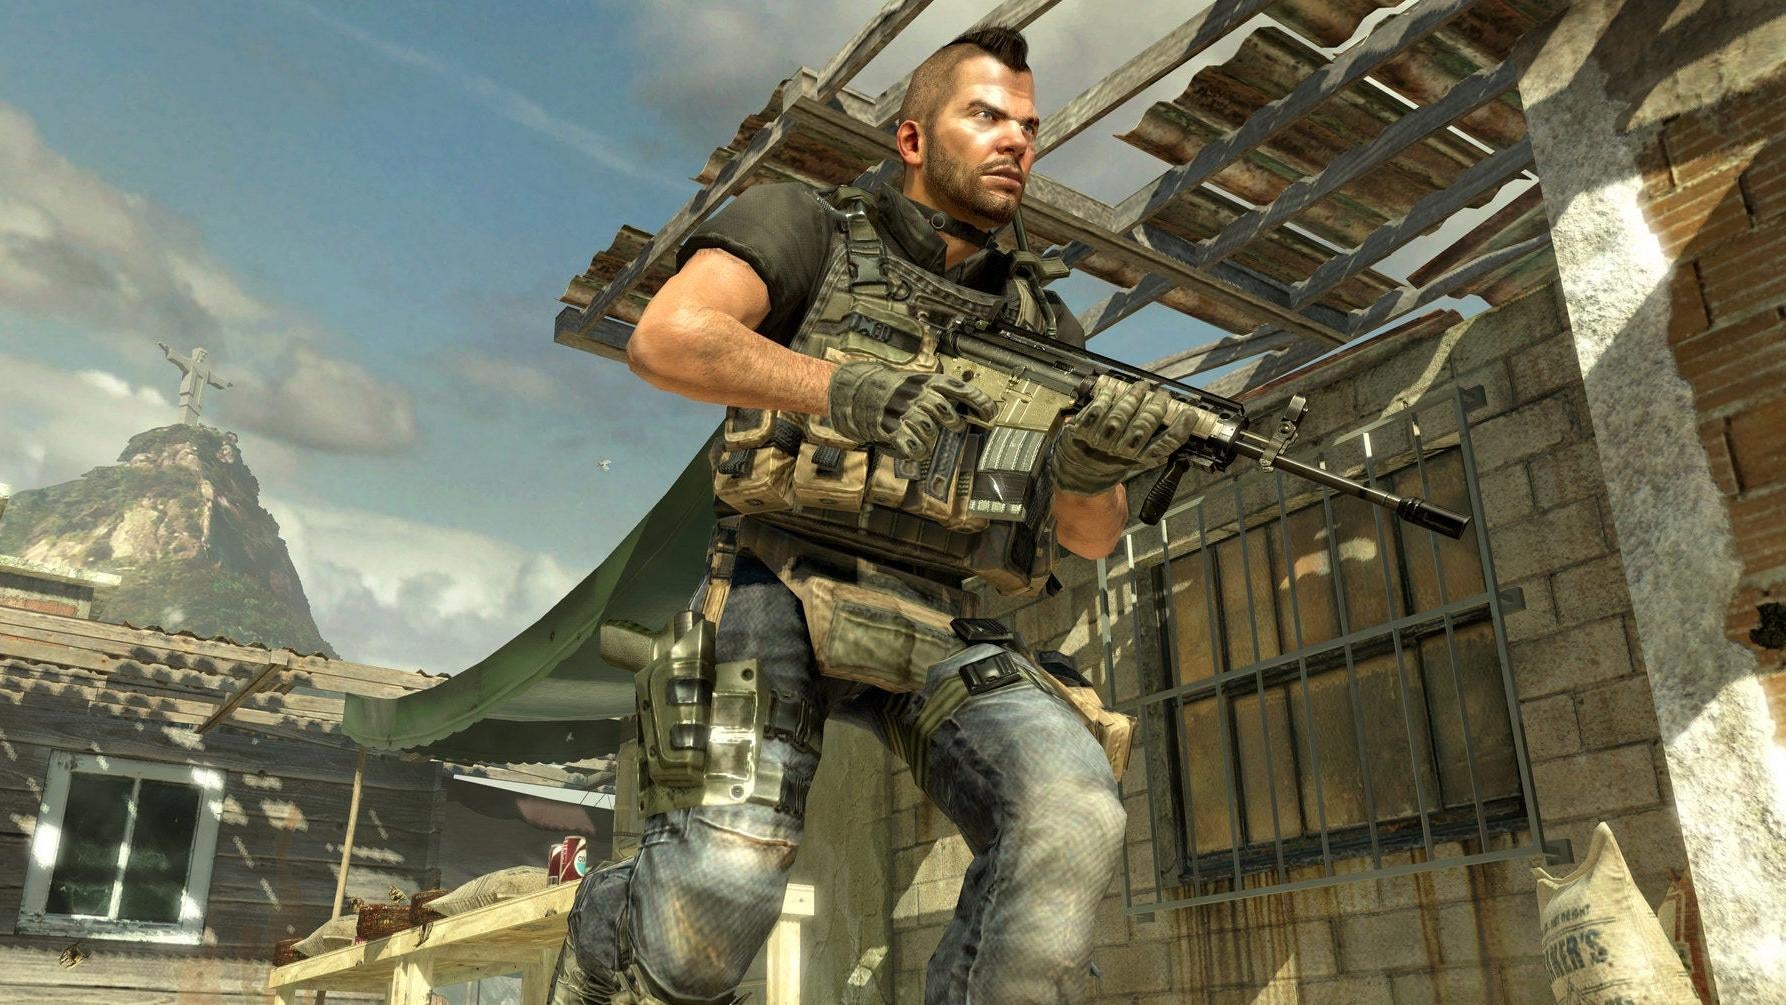 Steam: Modern Warfare 2 Second Lowest Rated Game – MMO Fallout